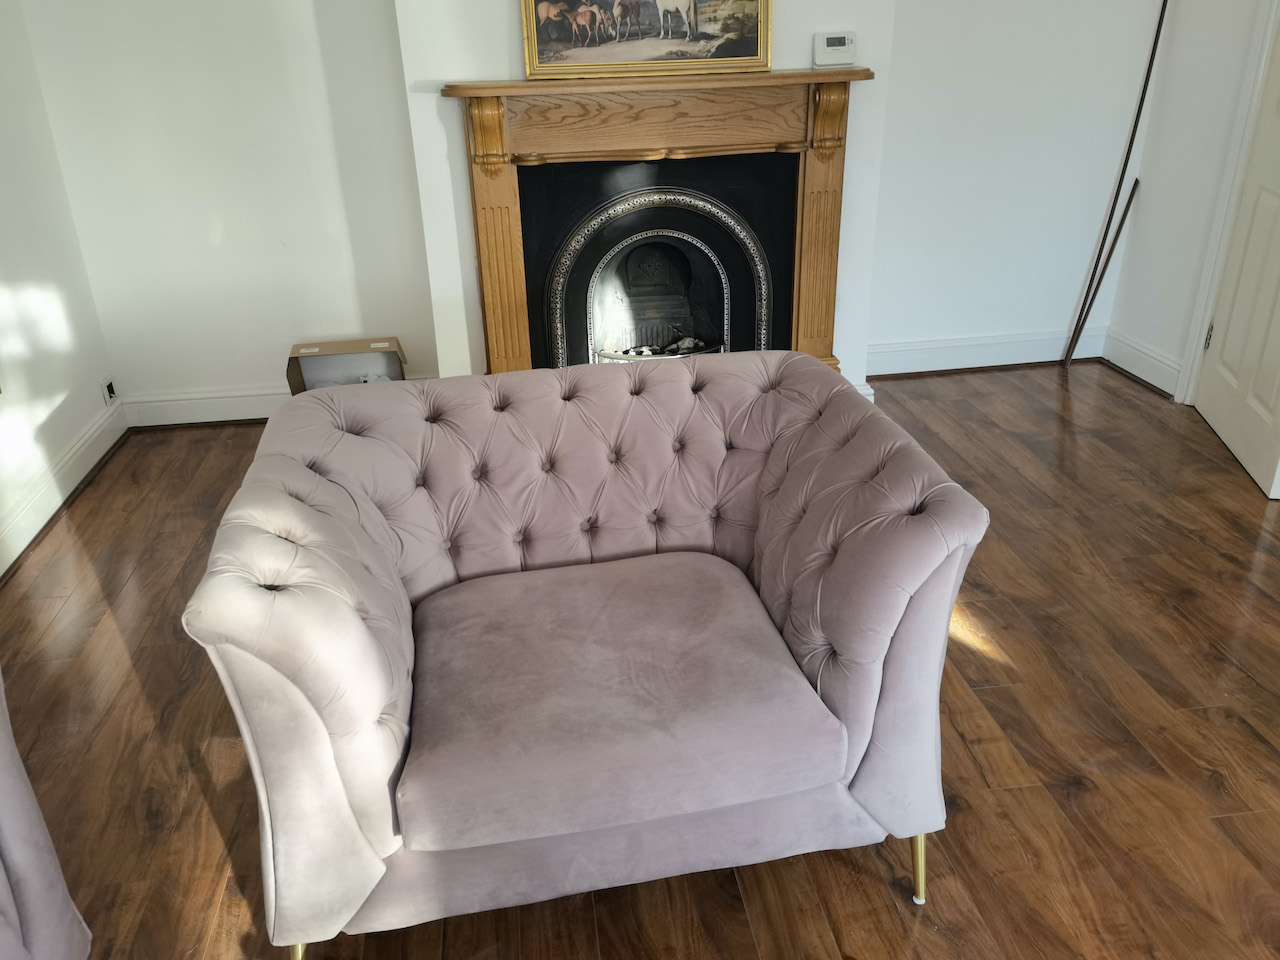 Three-seater sofa and Chesterfield Modern armchair on golden legs